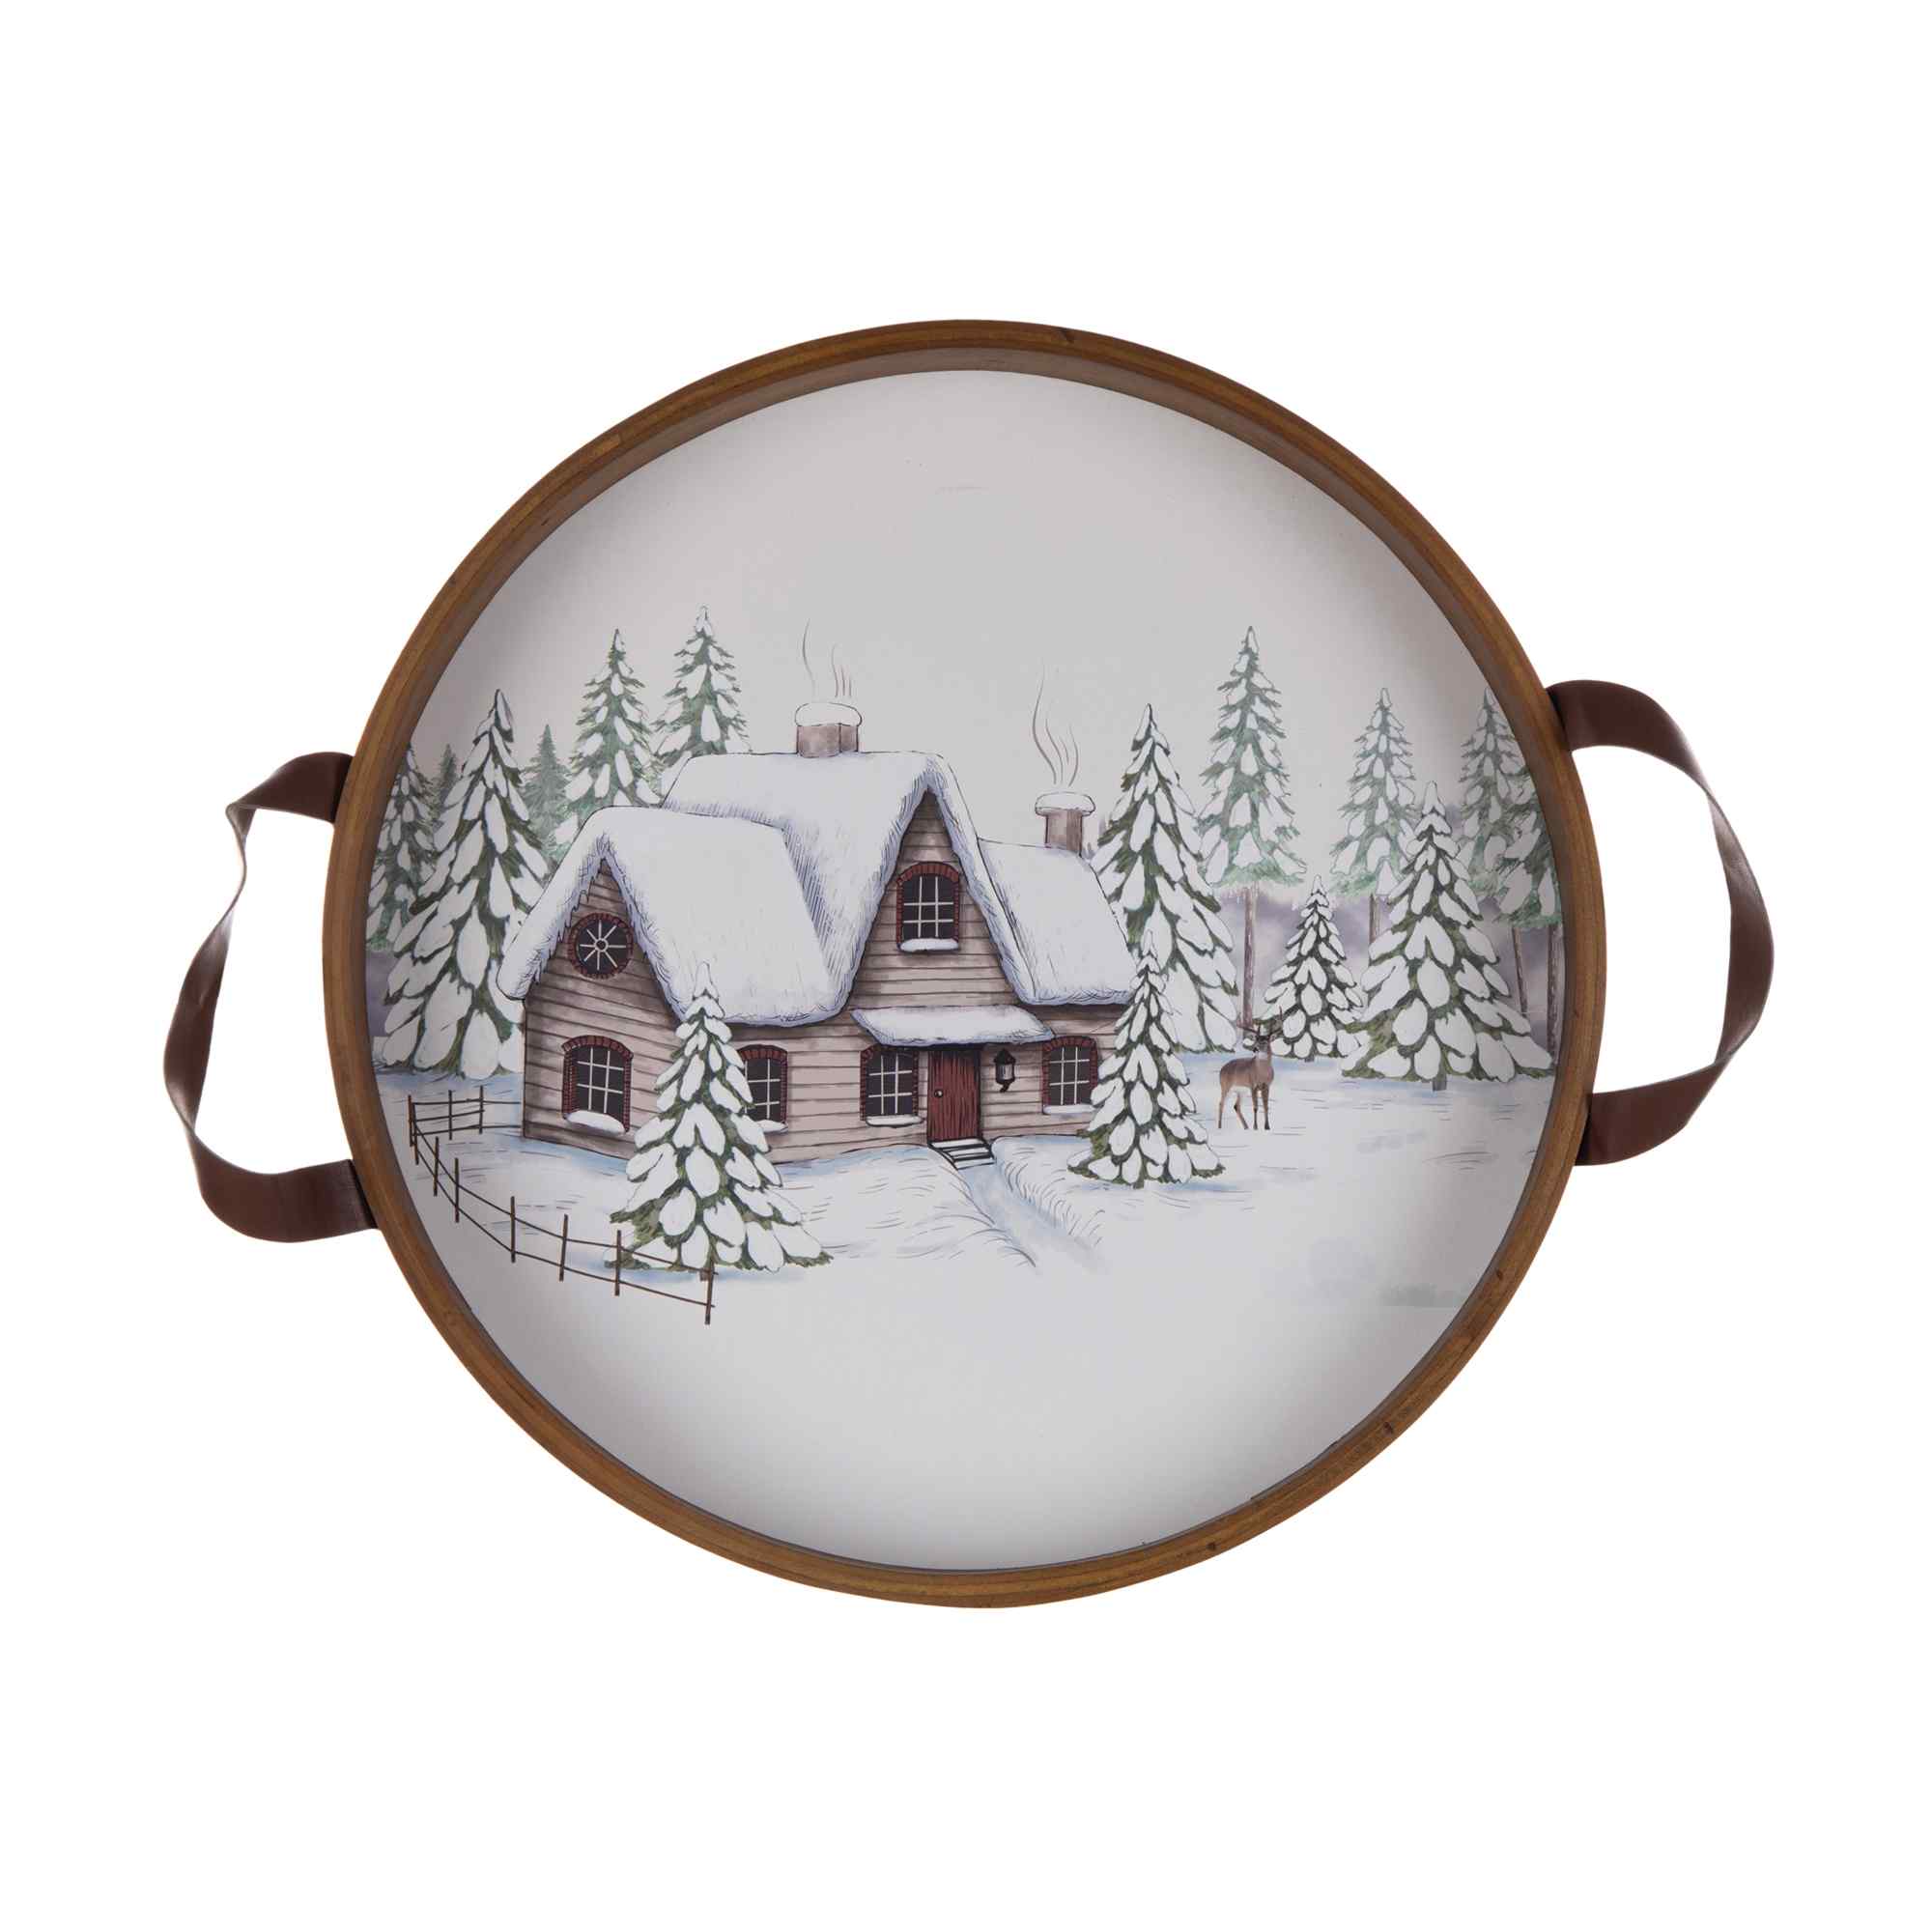 Melrose Set of 2 White and Brown Wooden Christmas Winter Scene Decorative Trays 15.75"